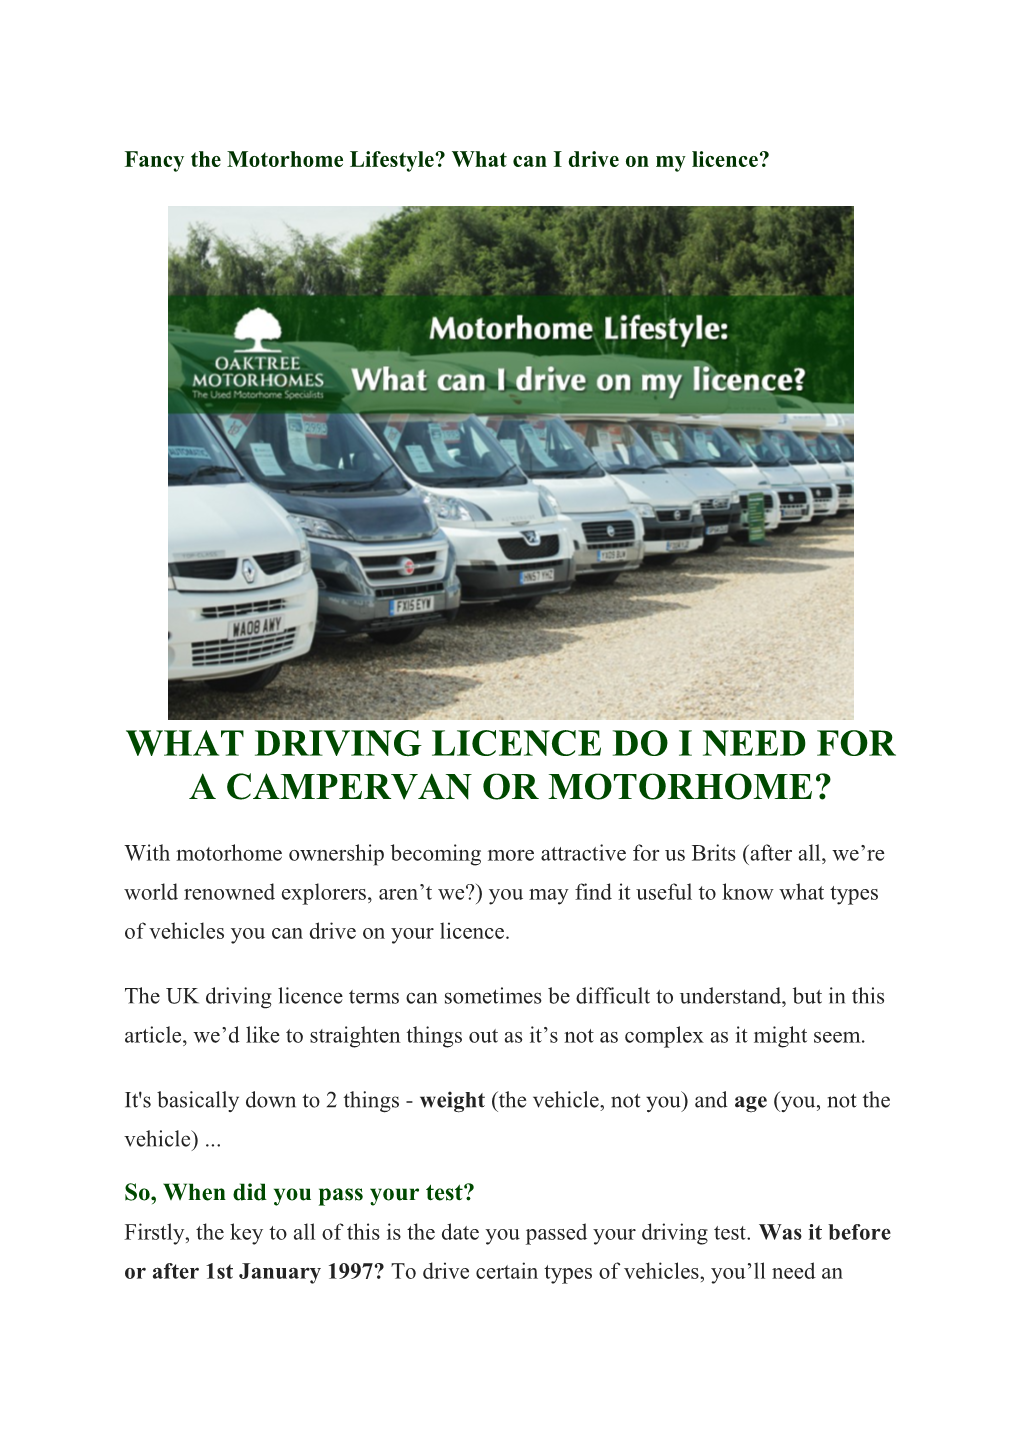 Fancy the Motorhome Lifestyle? What Can I Drive on My Licence?